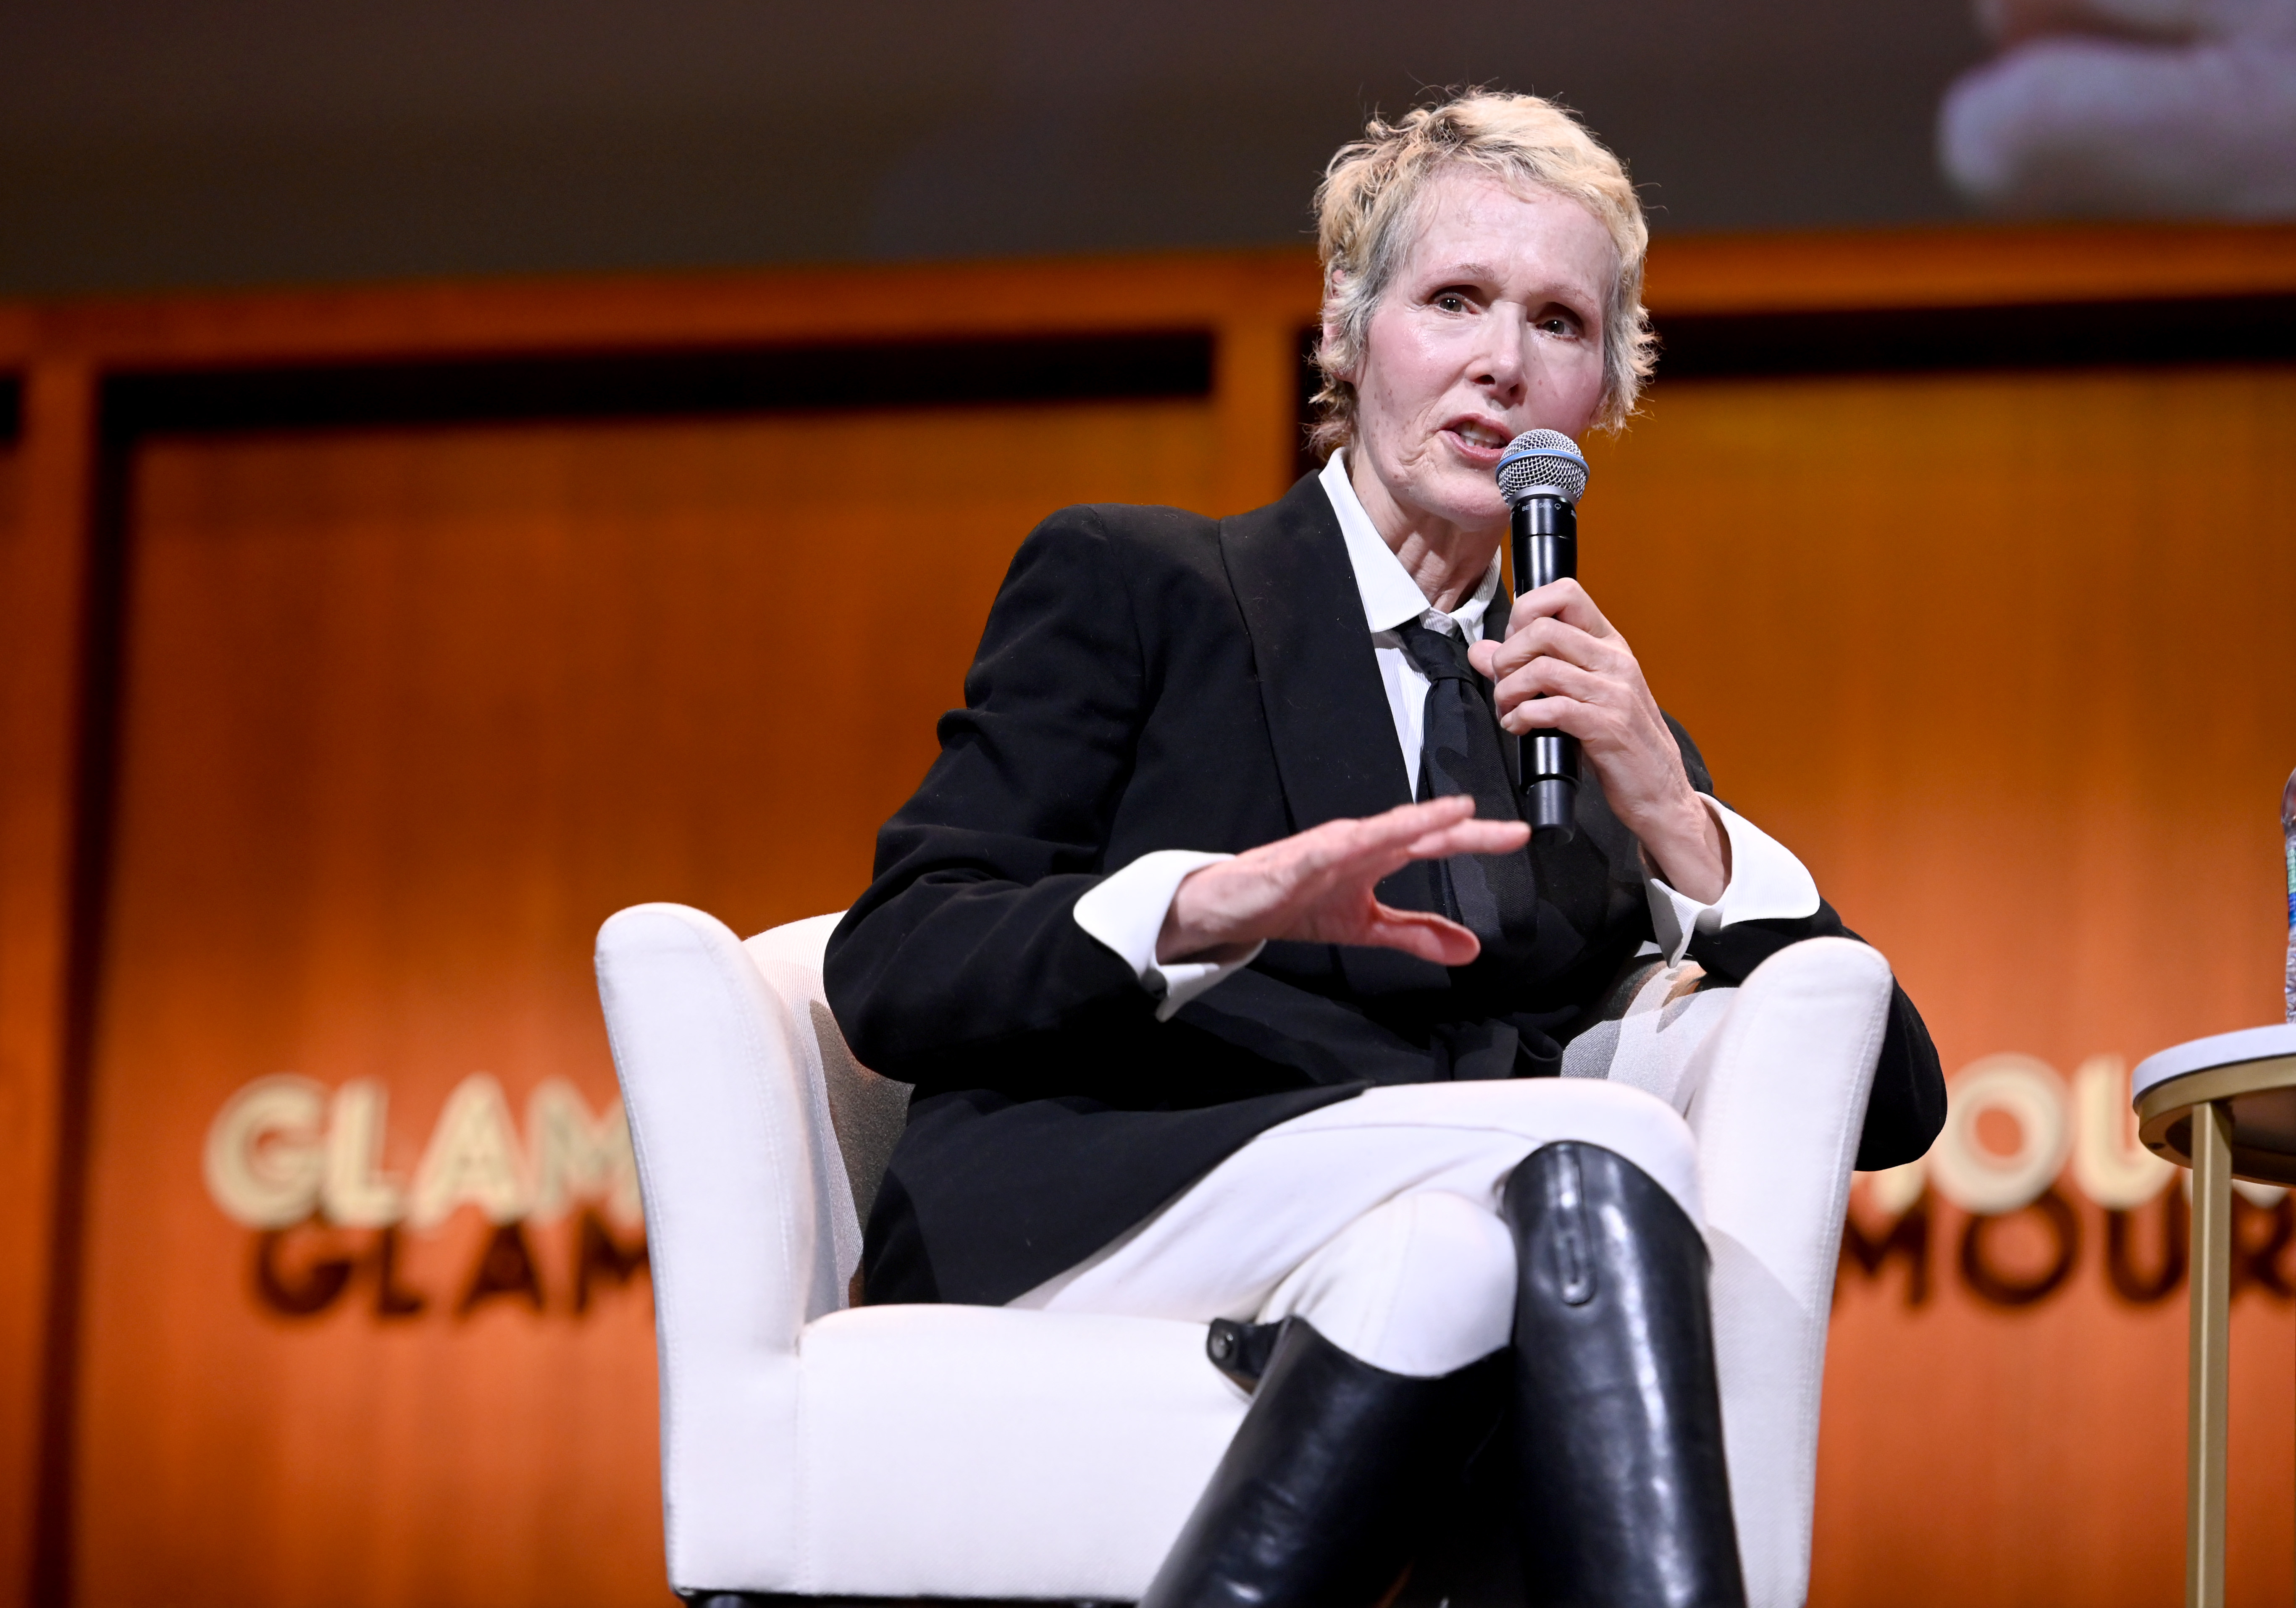 A photo of E. Jean Carroll during a 2019 event for Glamour magazine